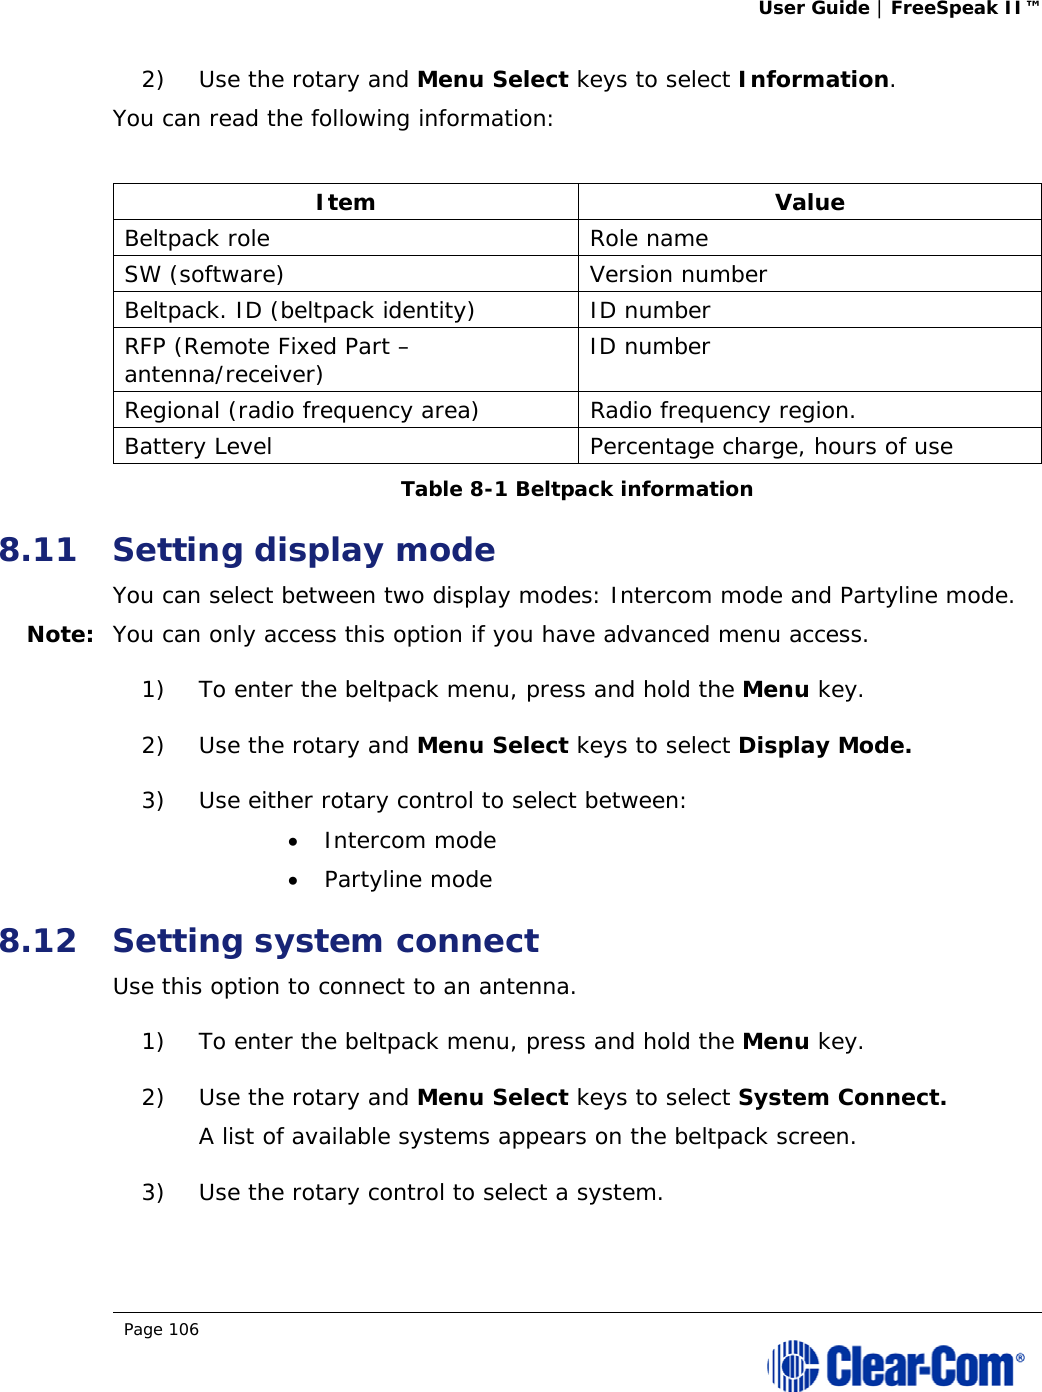 User Guide | FreeSpeak II™  Page 106  2) Use the rotary and Menu Select keys to select Information. You can read the following information:  Item Value Beltpack role  Role name SW (software)  Version number Beltpack. ID (beltpack identity)  ID number RFP (Remote Fixed Part – antenna/receiver)  ID number Regional (radio frequency area)  Radio frequency region. Battery Level  Percentage charge, hours of use Table 8-1 Beltpack information 8.11 Setting display mode You can select between two display modes: Intercom mode and Partyline mode. Note: You can only access this option if you have advanced menu access. 1) To enter the beltpack menu, press and hold the Menu key. 2) Use the rotary and Menu Select keys to select Display Mode.  3) Use either rotary control to select between:  Intercom mode  Partyline mode 8.12 Setting system connect Use this option to connect to an antenna. 1) To enter the beltpack menu, press and hold the Menu key. 2) Use the rotary and Menu Select keys to select System Connect. A list of available systems appears on the beltpack screen. 3) Use the rotary control to select a system. 